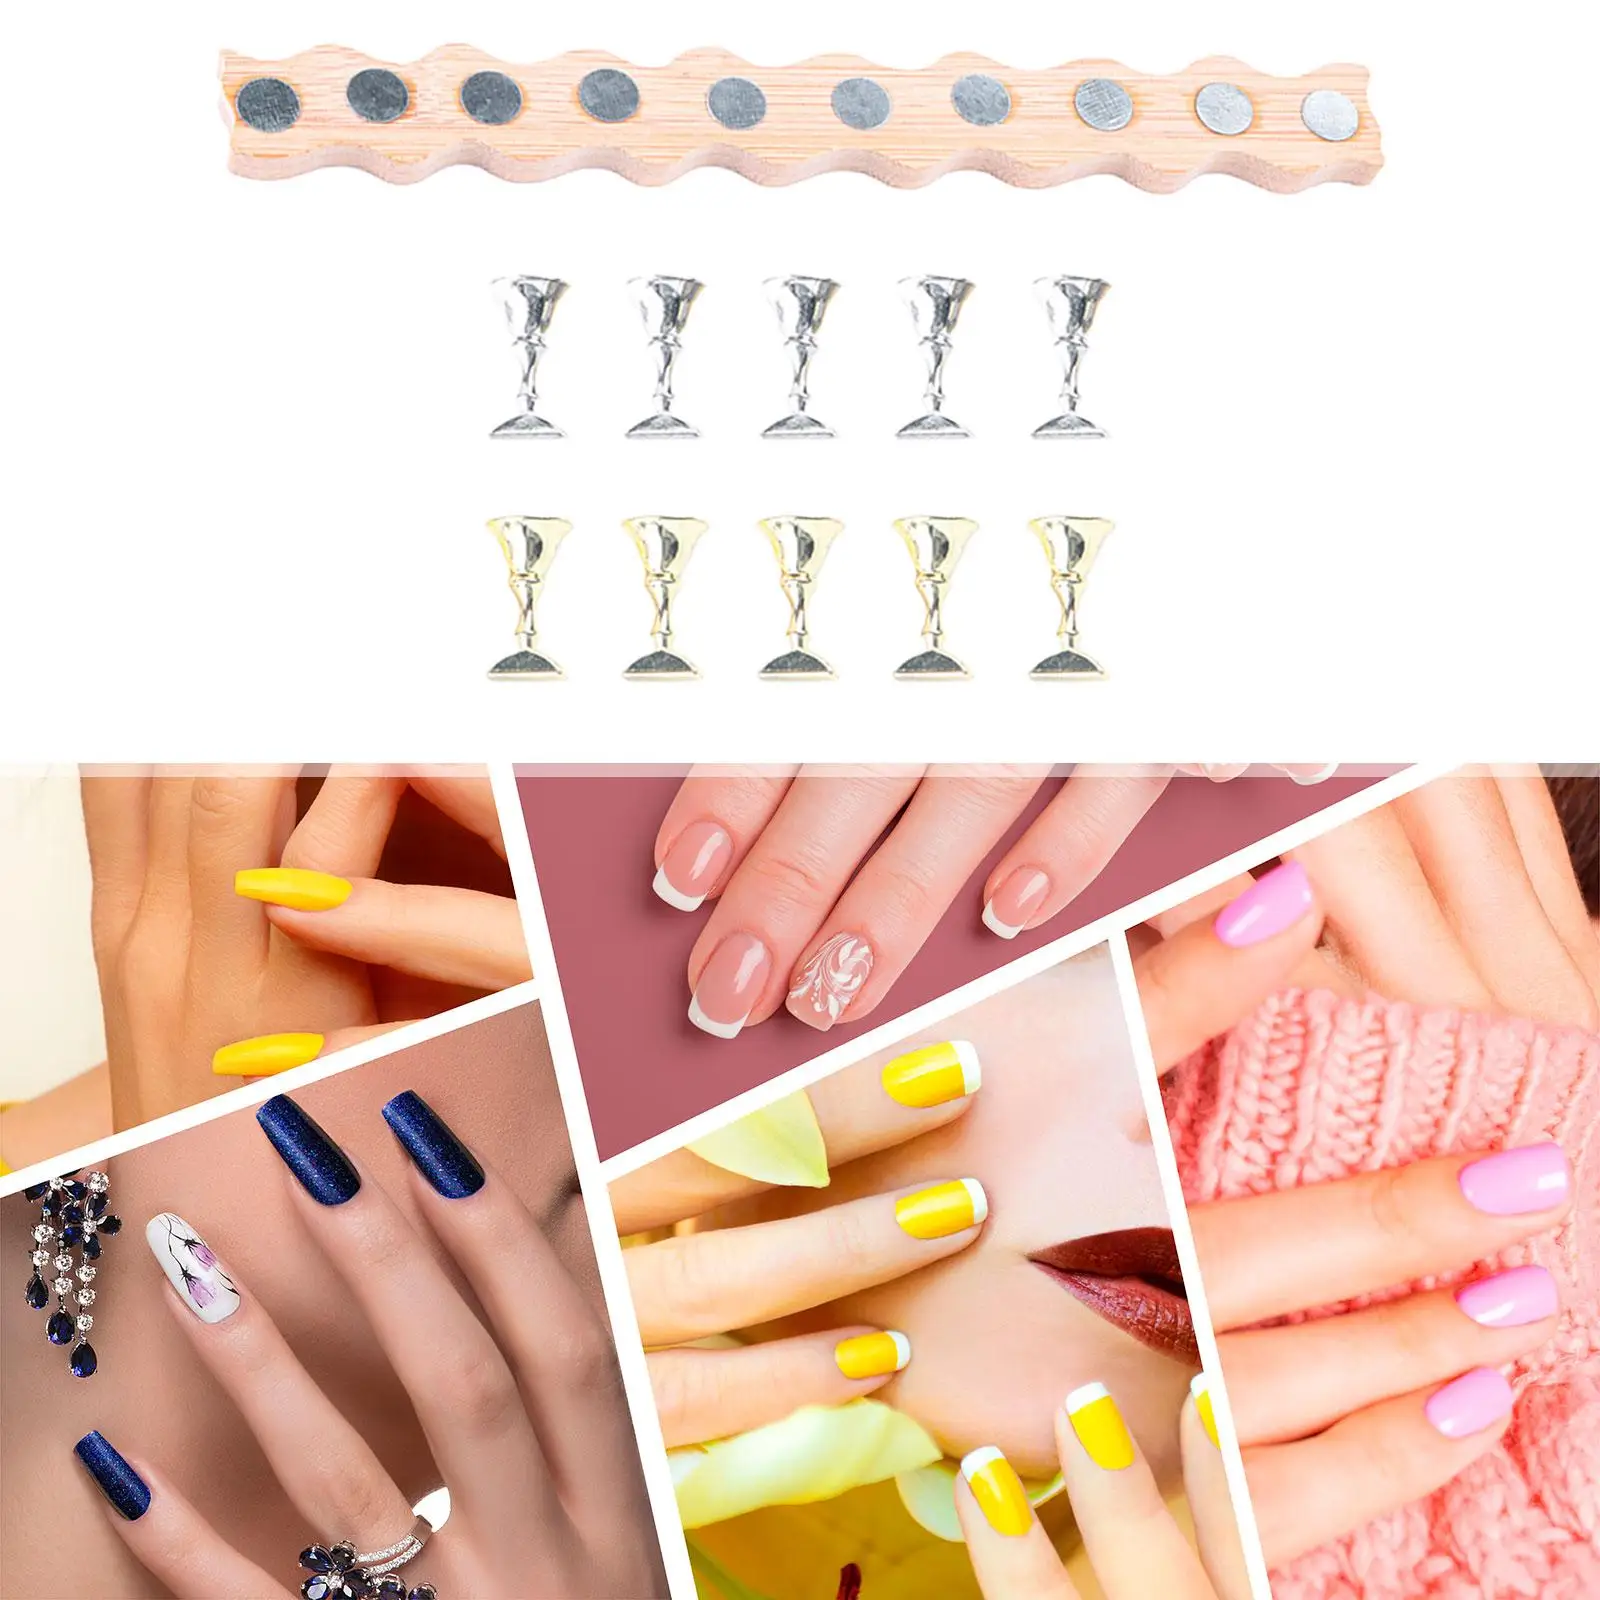 Nail Practice Stand Nail Art Supplies Reusable Nail Tip Holders for Makeup Manicurists Home Salon DIY Beginner Training Practice